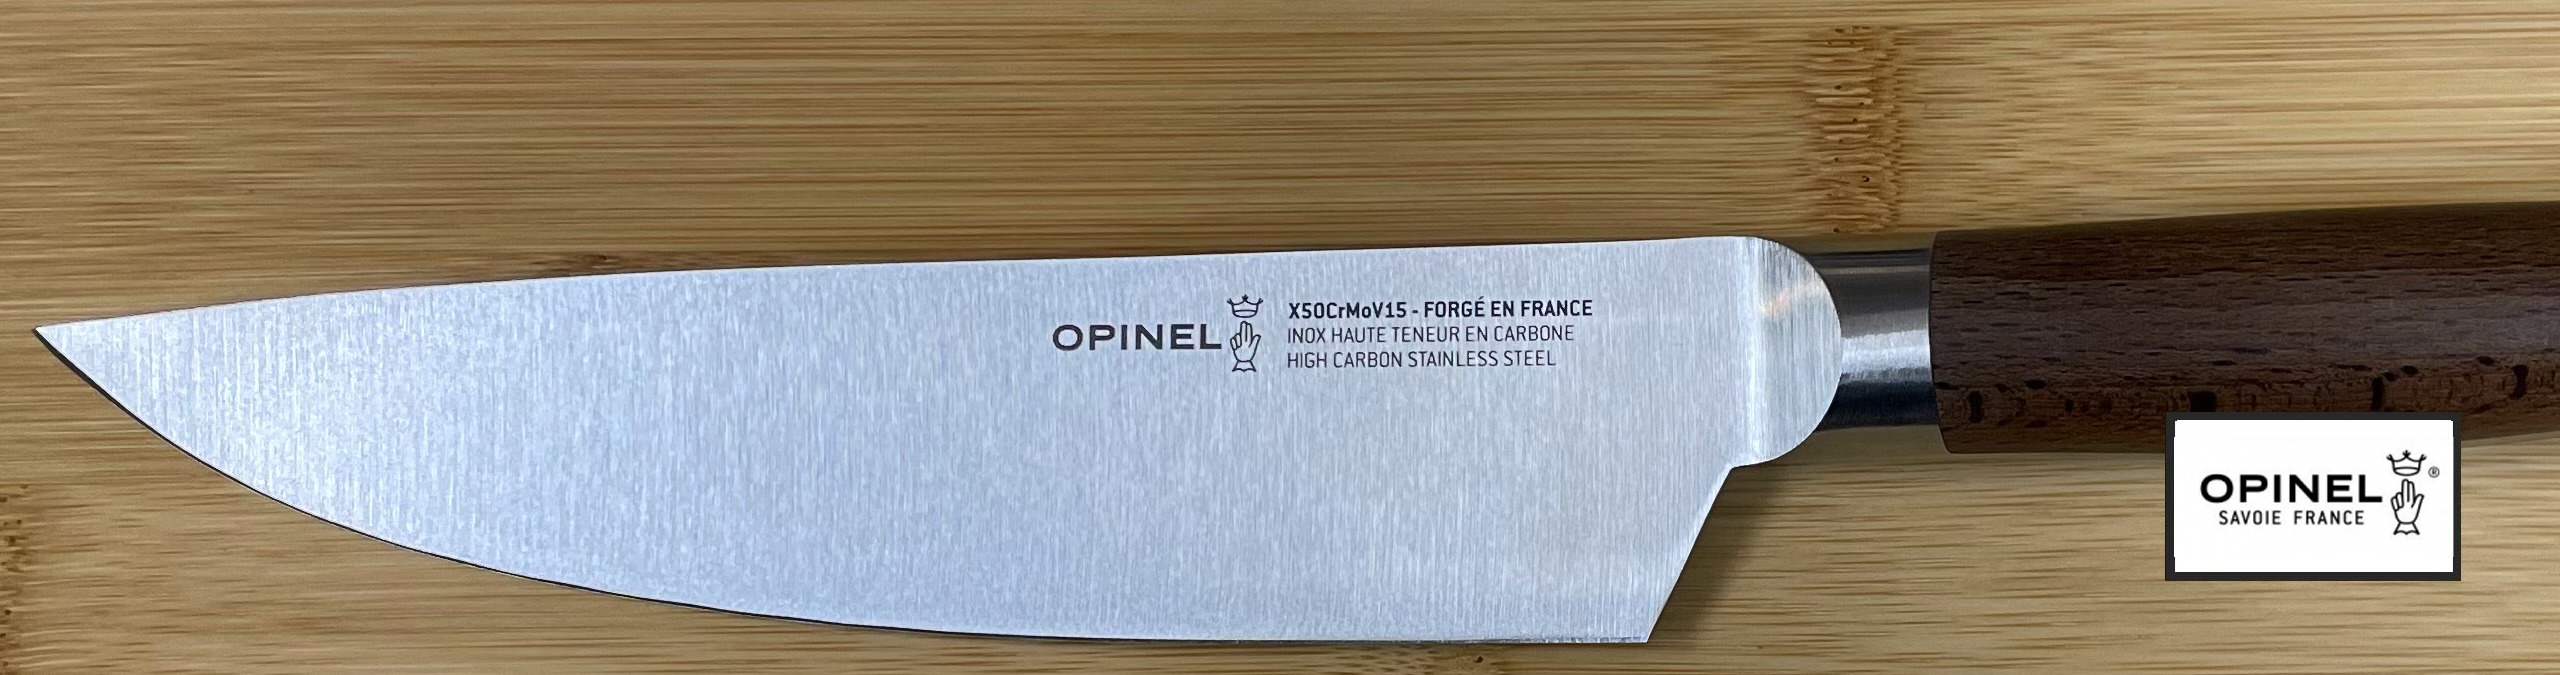 opinel forge couteau paris